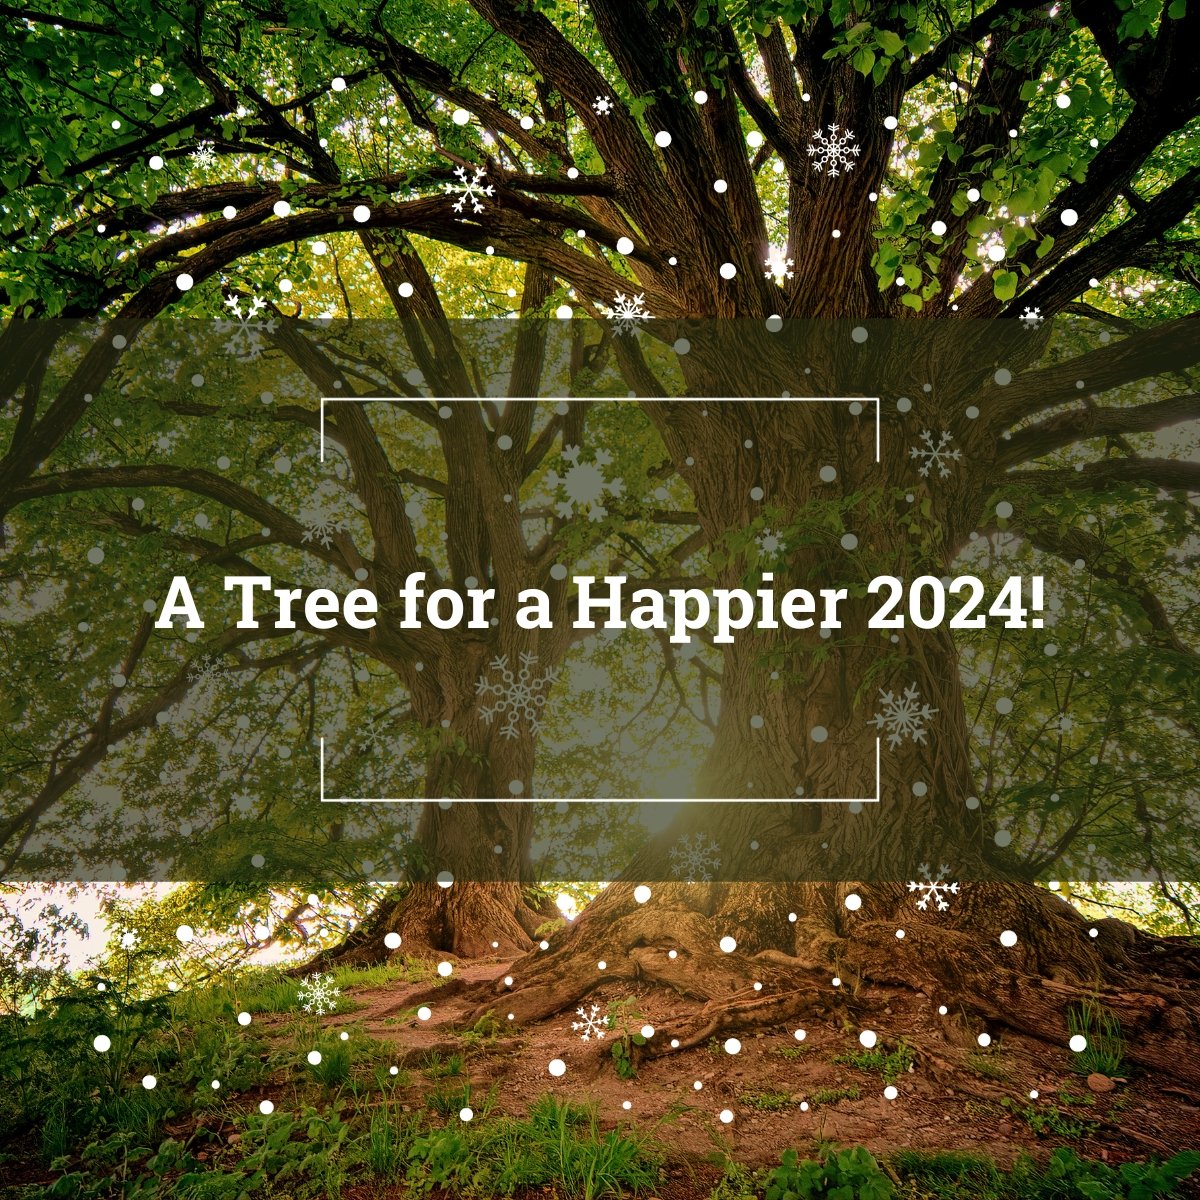 🌿This #holidayseason , join #ProspecTree in gifting sustainability! Gift a tree for just €78.72 and enjoy a 157% growth in 10 years.🌳Not only does it fight climate change by absorbing CO2, but it's also an investment for the future. Spread joy and green growth!#SustainableGift